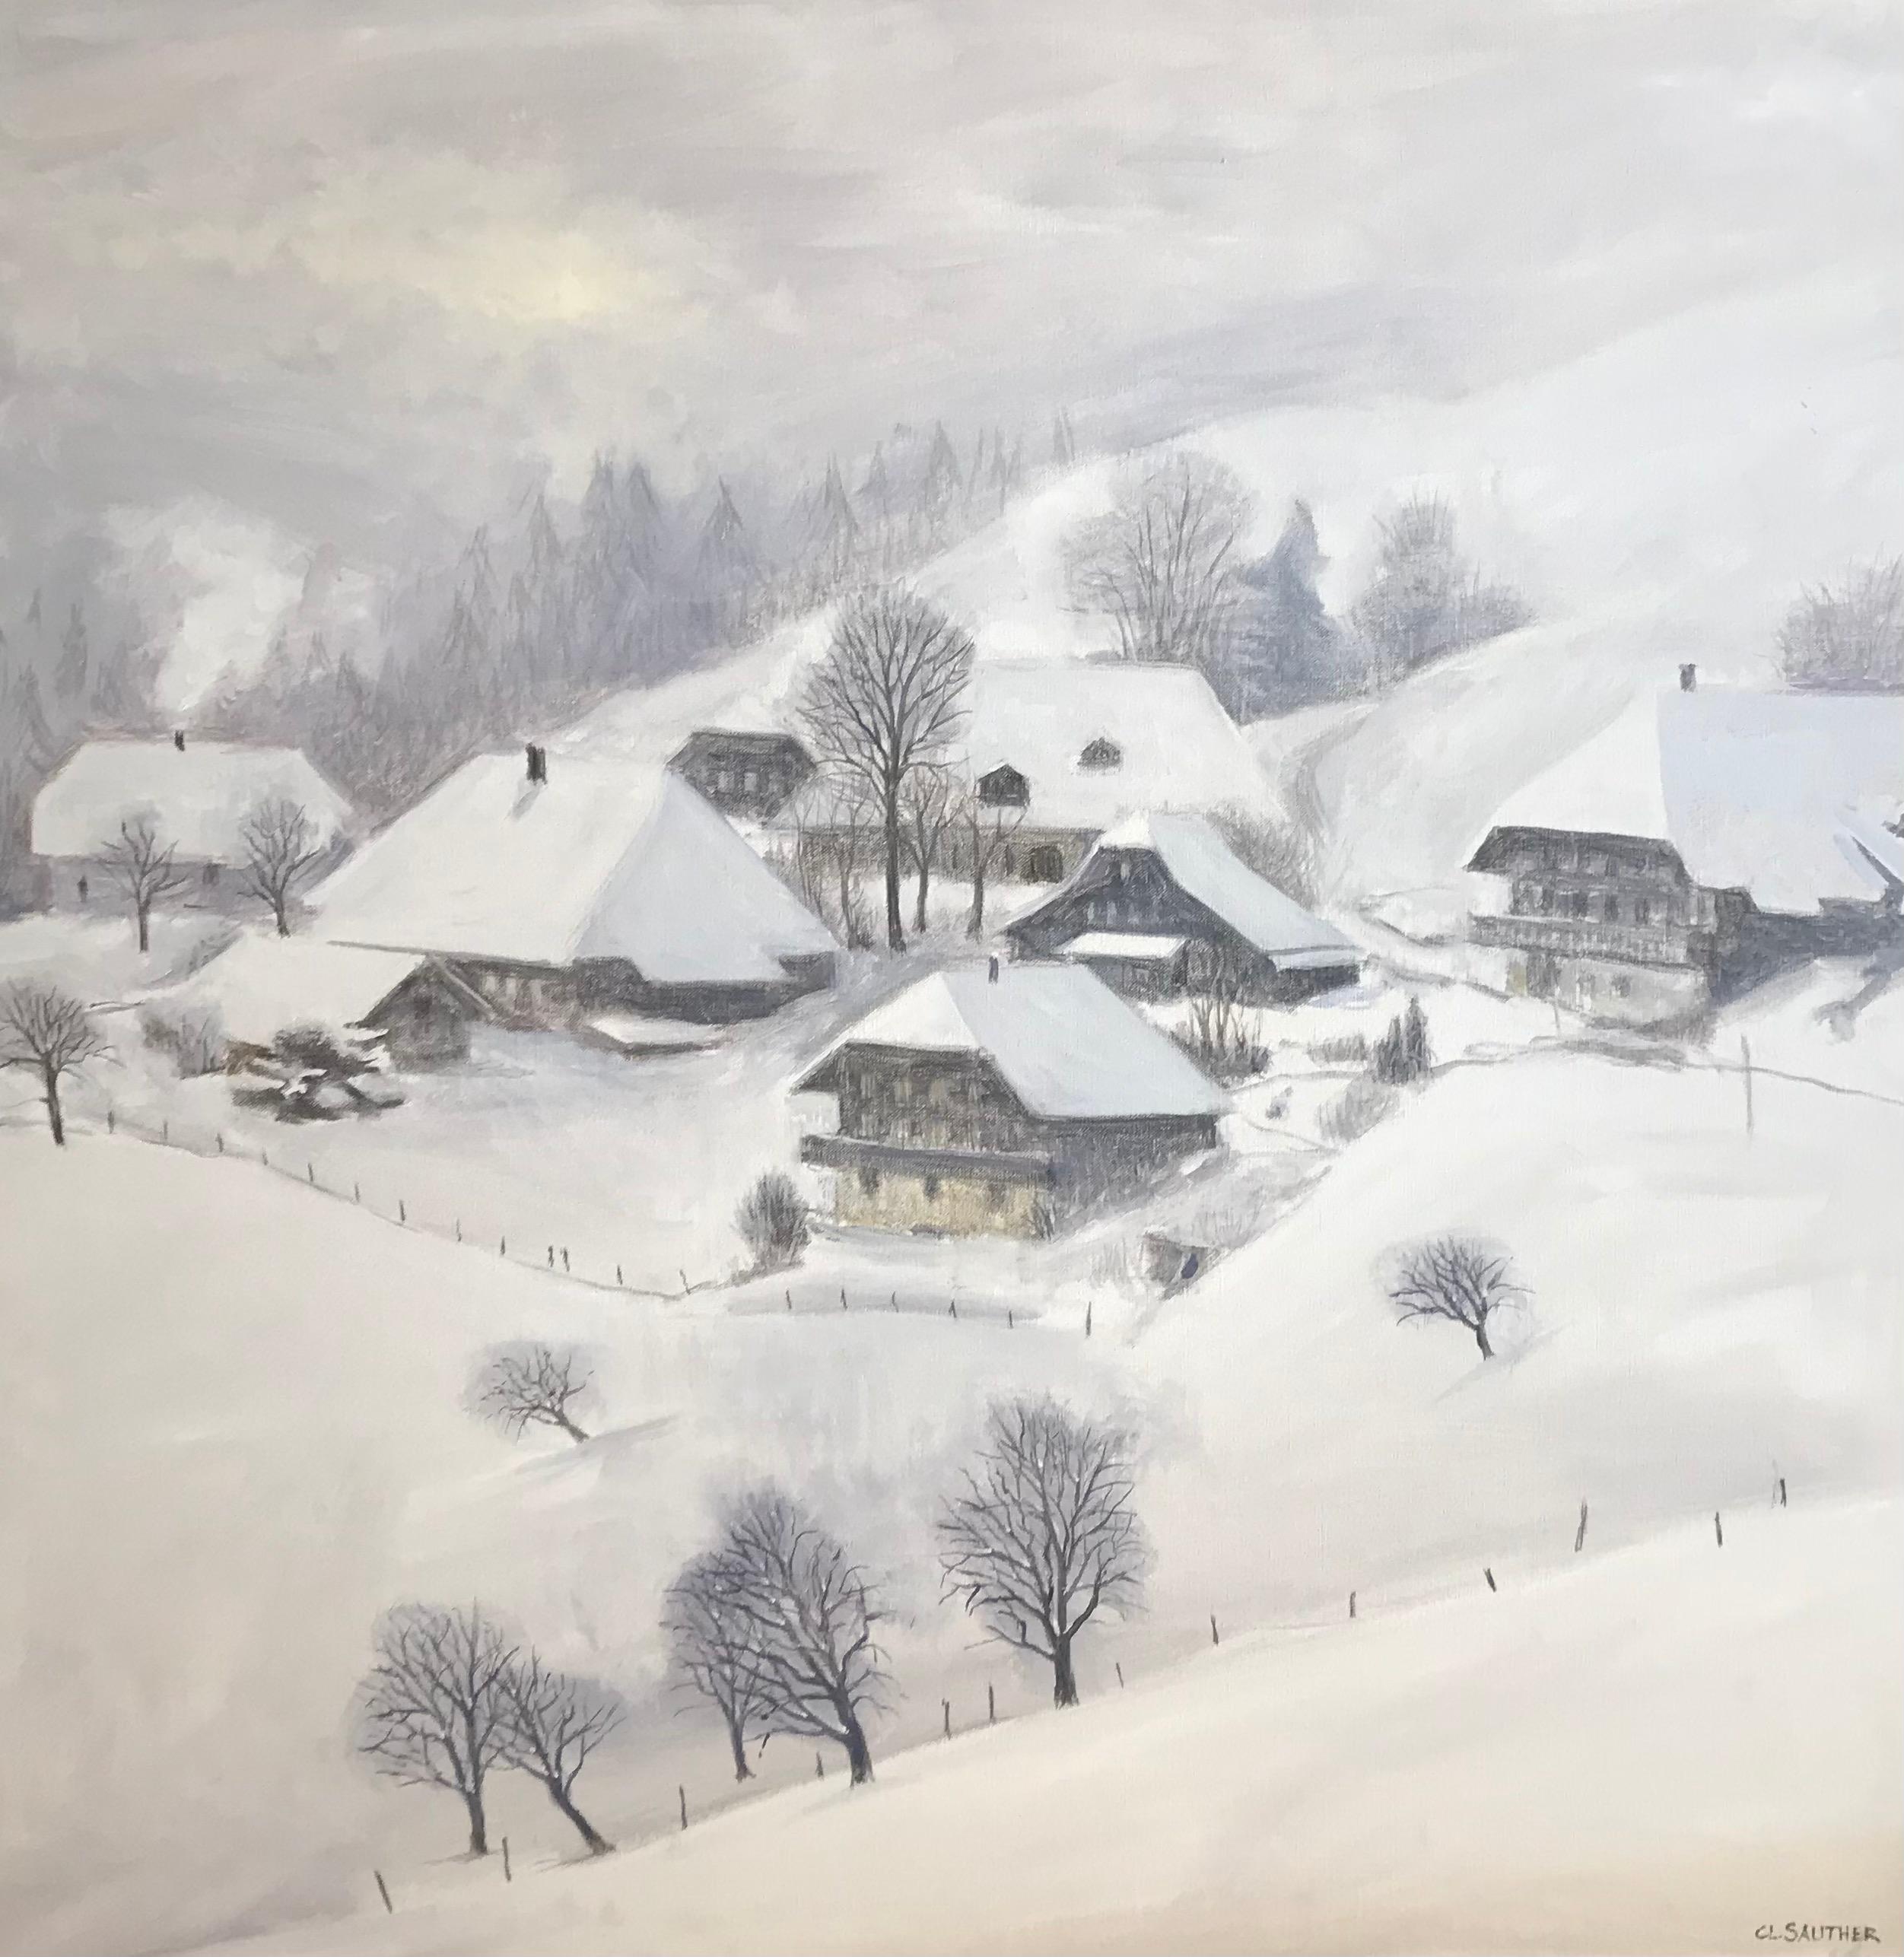 Claude Sauthier Landscape Painting - Snow in Hirsegg, Bern Switzerland